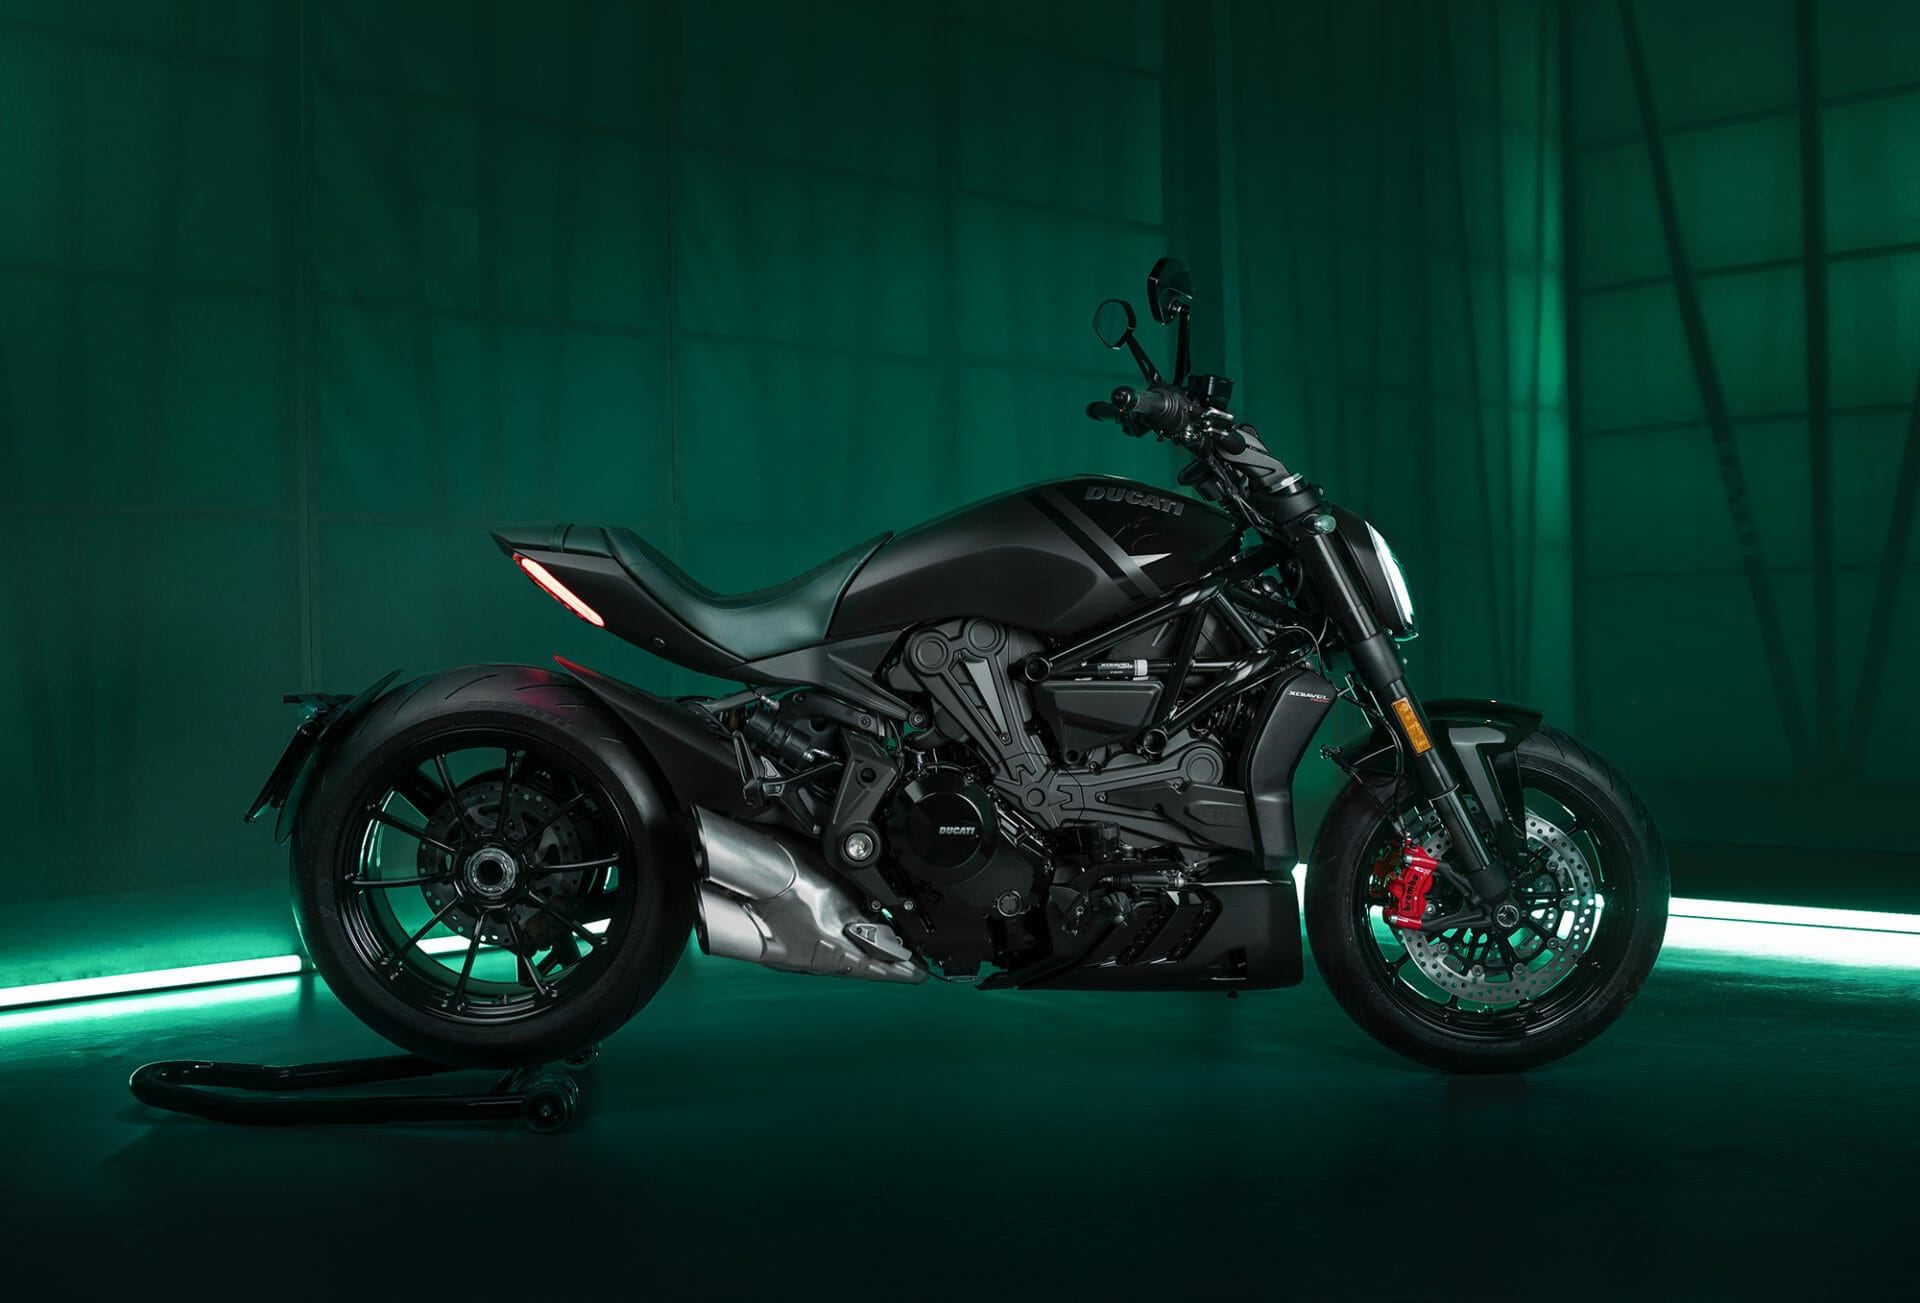 New and limited: Ducati XDiavel Nera
- also in the MOTORCYCLES.NEWS APP